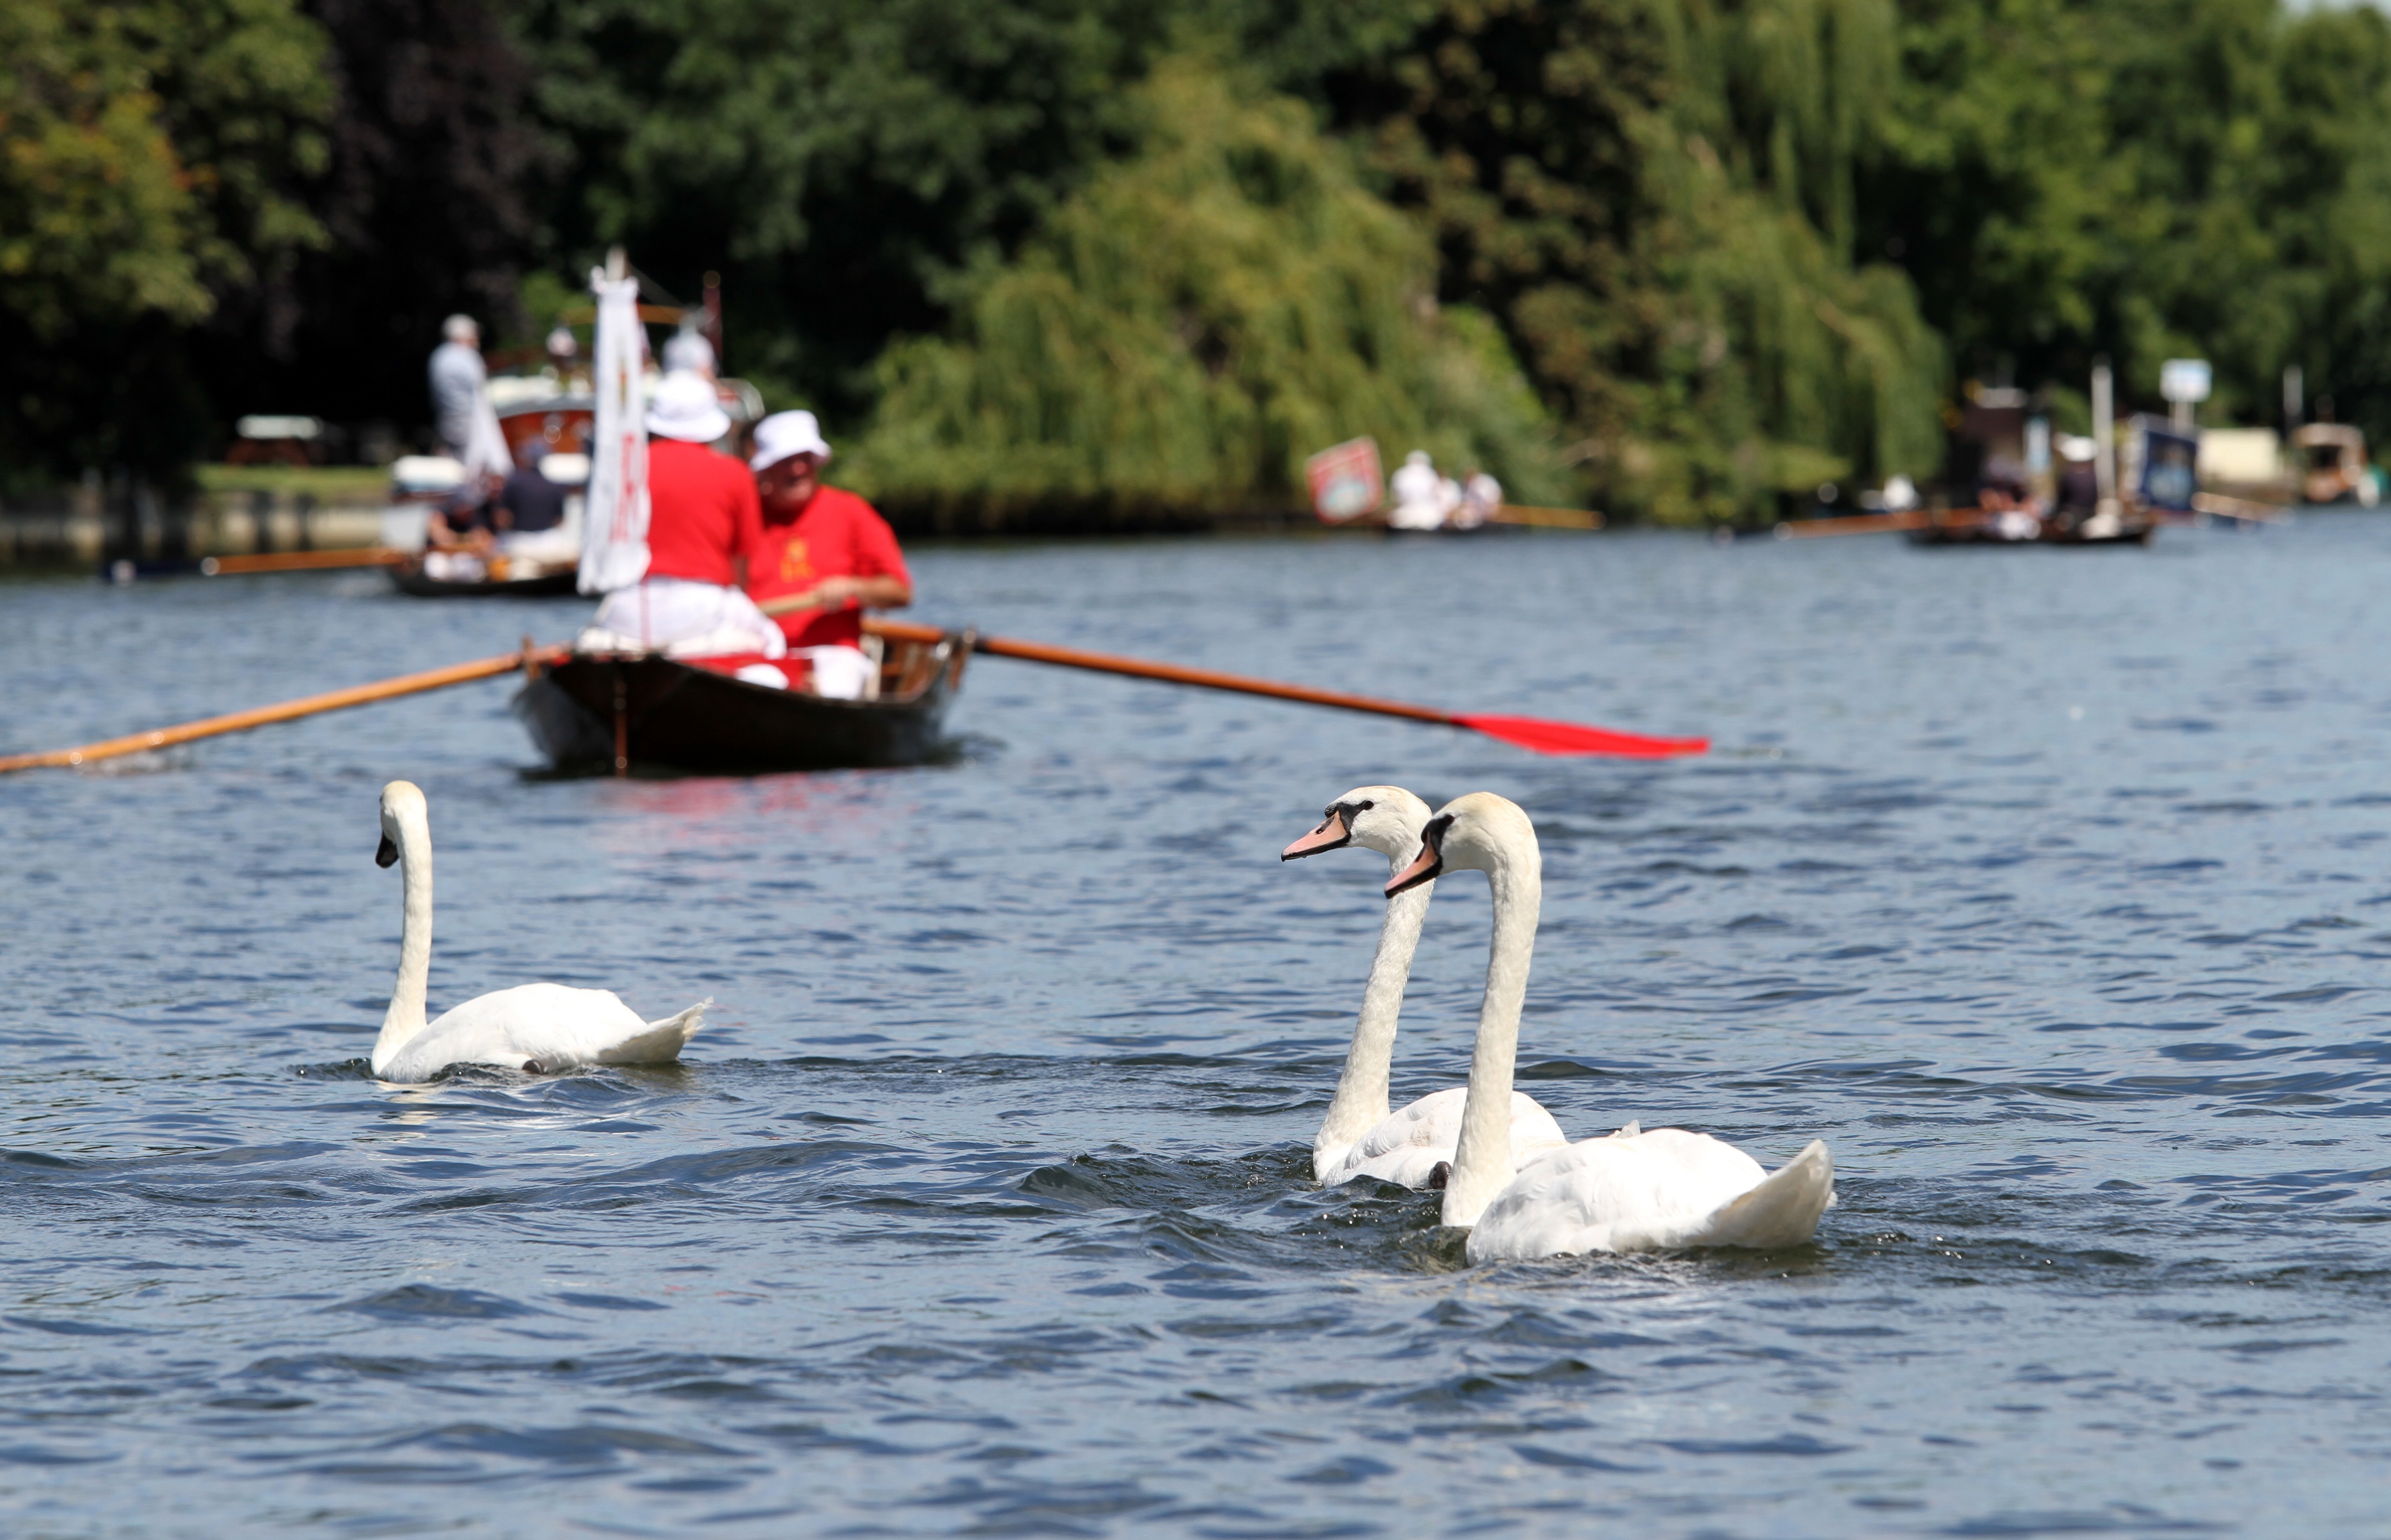 Britain's Queen Elizabeth's Swan Uppers look for cygnets while sailing down the River Thames, in Staines on Thames, England, Monday July 18, 2016, during the annual count of the Queen's swans on the river Thames. The queen is the traditional owner of unmarked mute swans and royal tradition requires they be counted each year. (AP Photo/Leonora Beck)